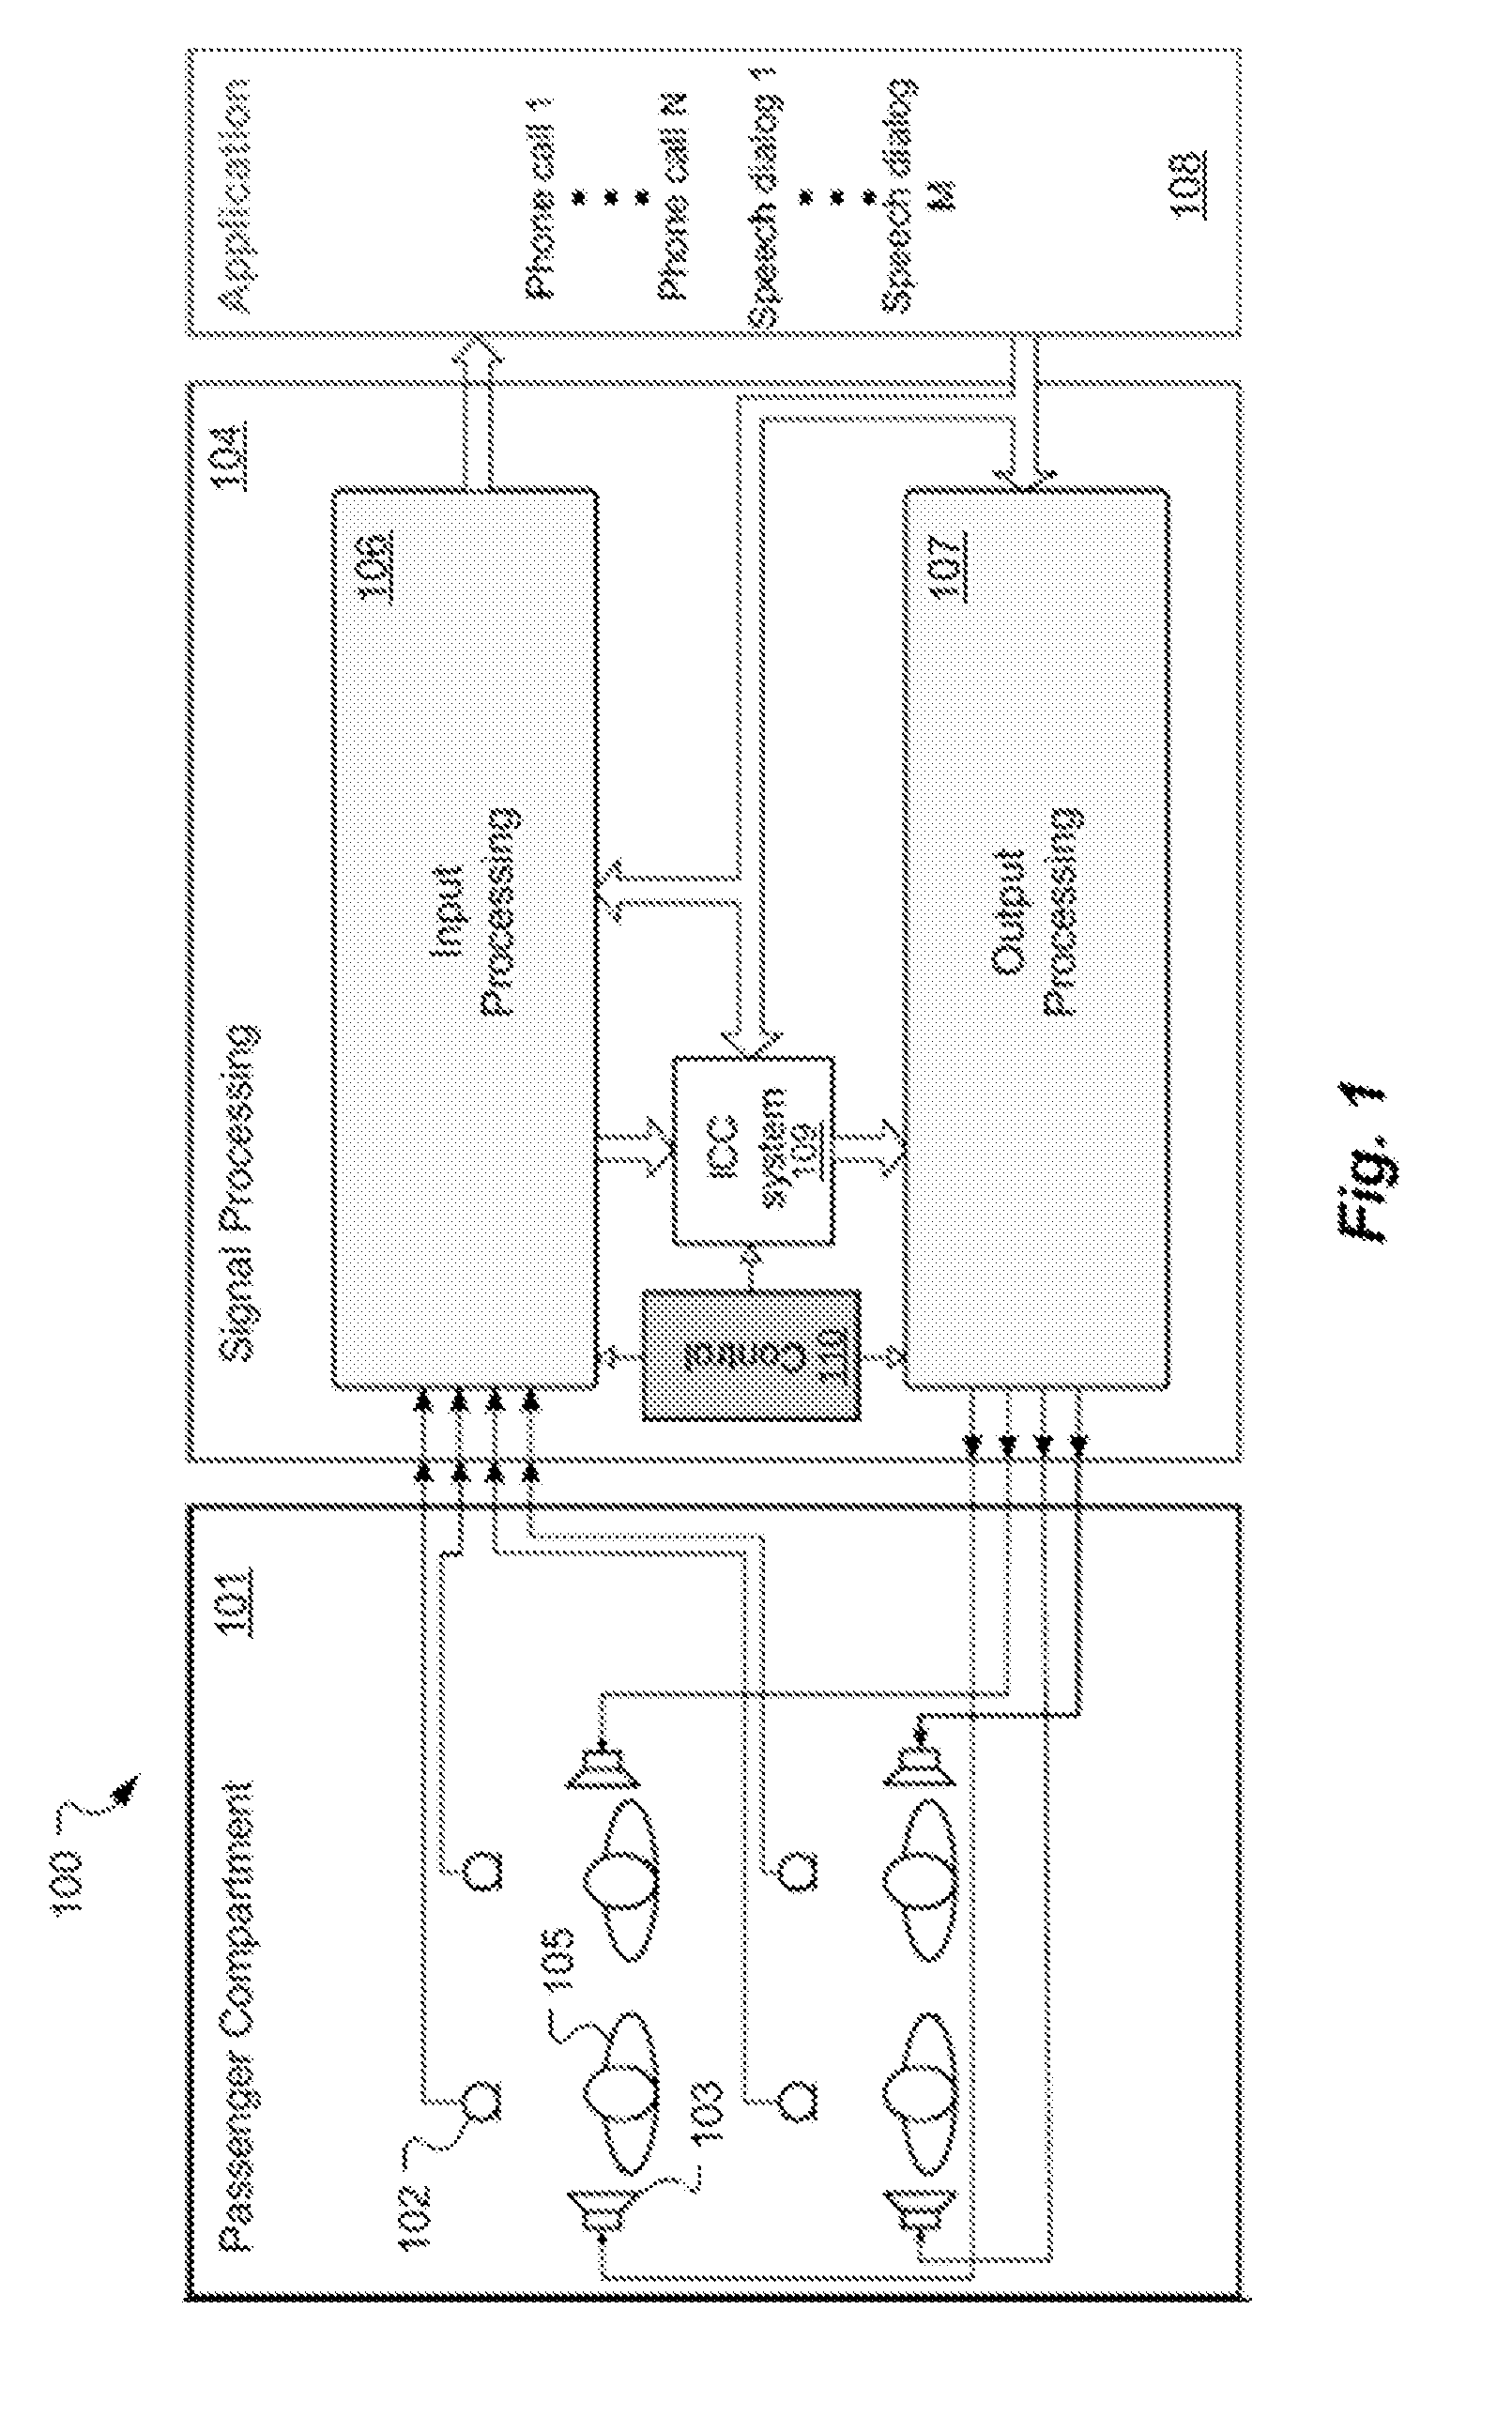 Speech communication system for combined voice recognition, hands-free telephony and in-car communication